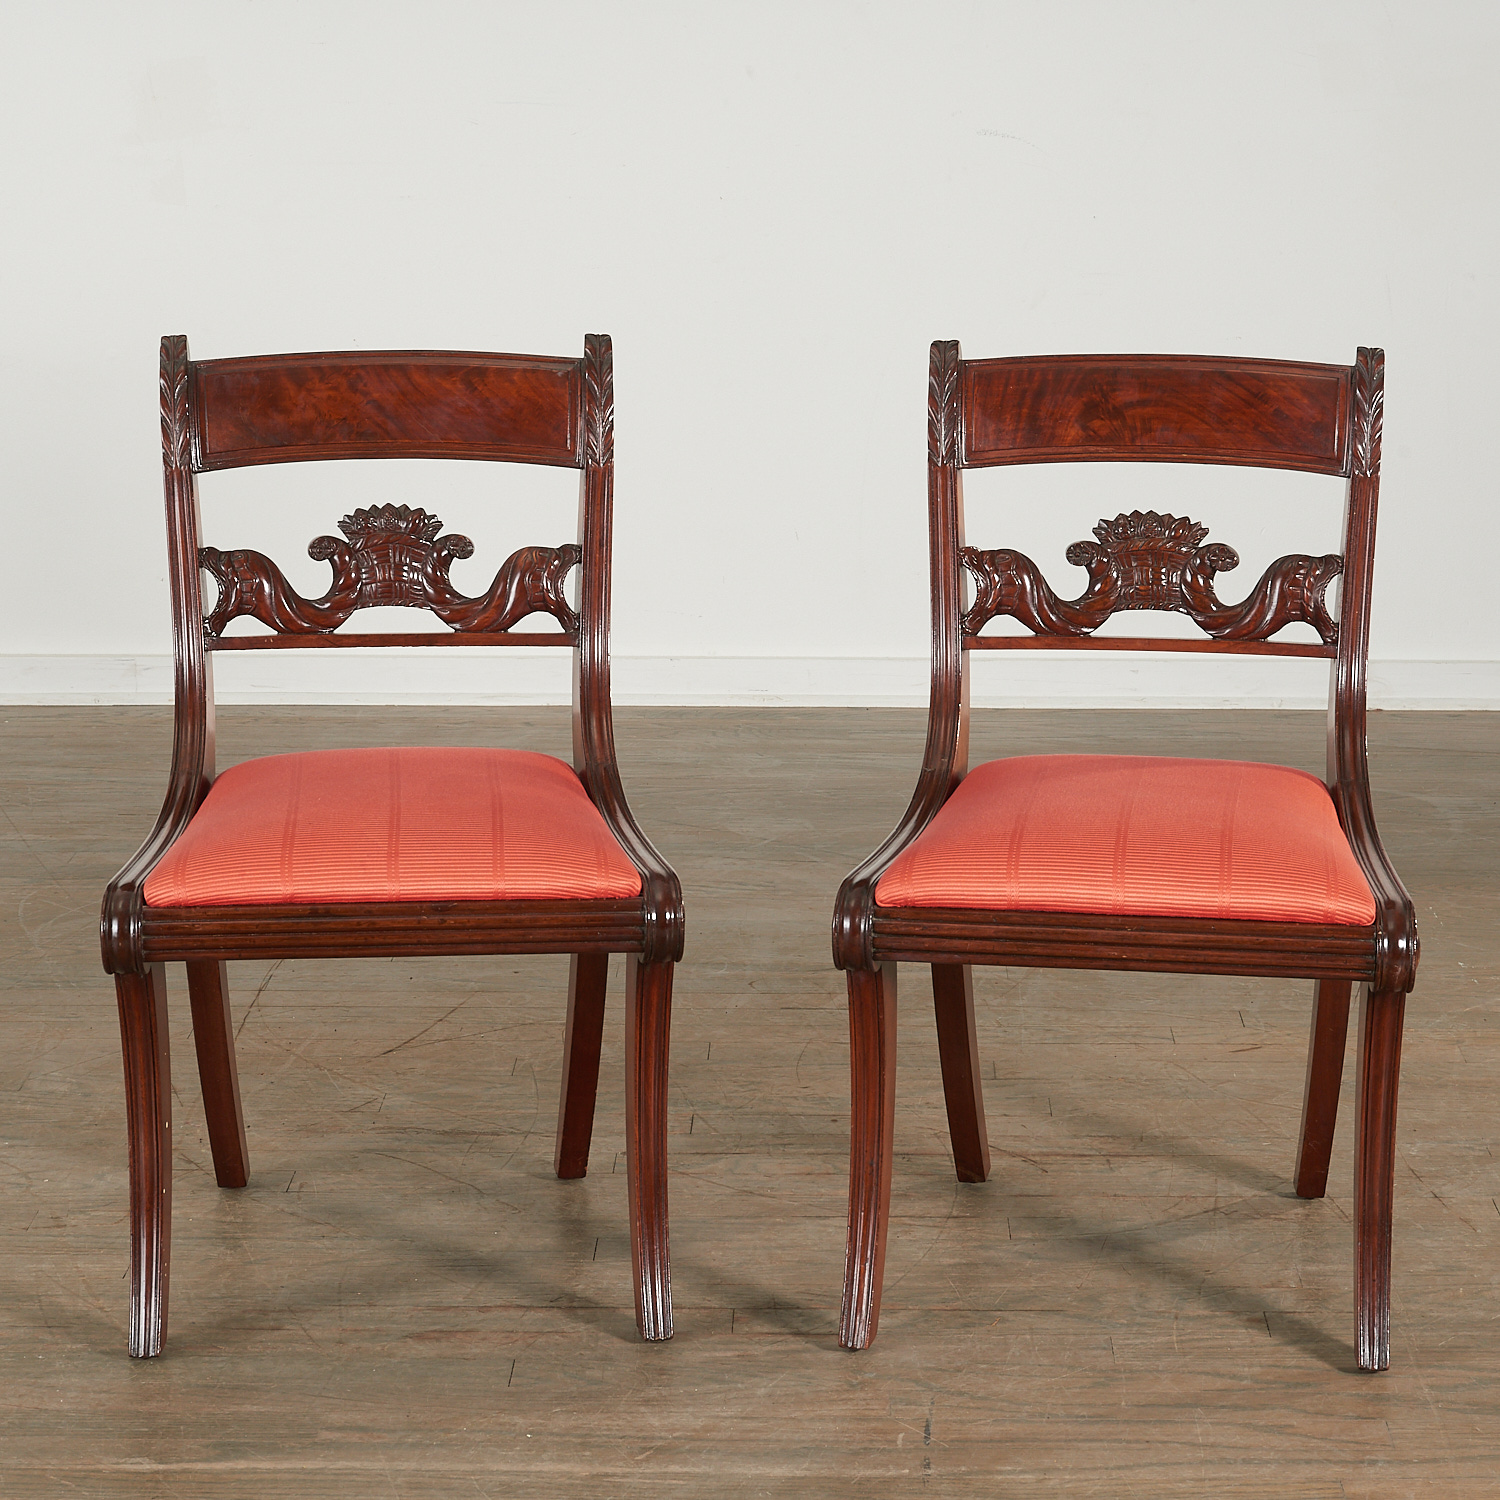 PAIR AMERICAN CLASSICAL CARVED